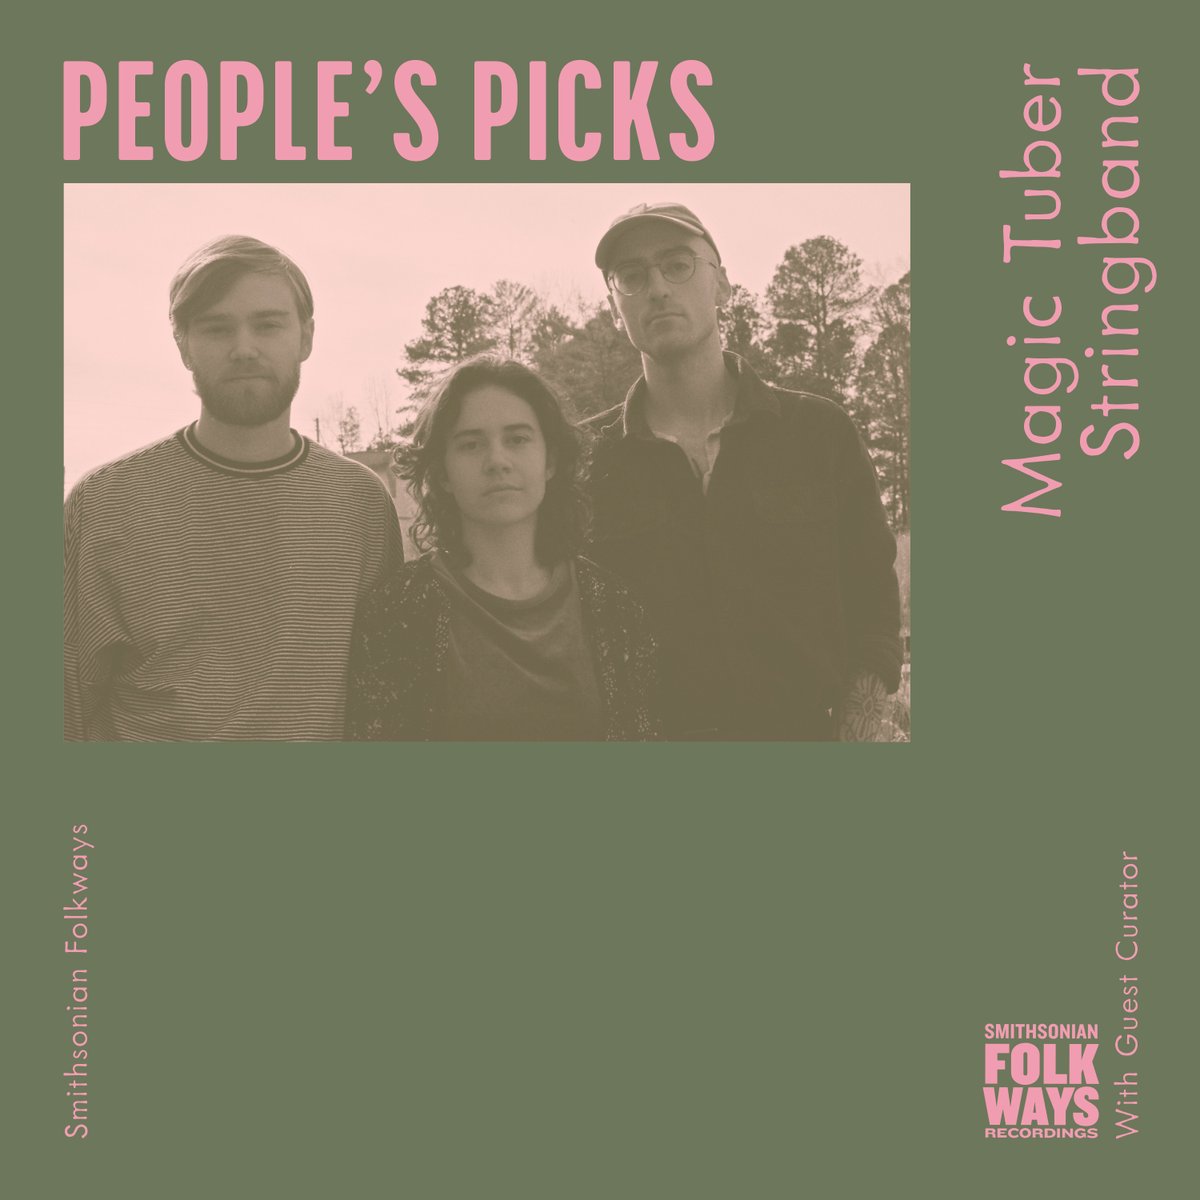 “Folkways records are constantly finding their way into our lives and our music,” says Evan Morgan of Magic Tuber Stringband, curators of this month’s People’s Picks playlist. “We hope these songs feel as special to you as they do to us.” Listen / Read: s.si.edu/3ysHytF